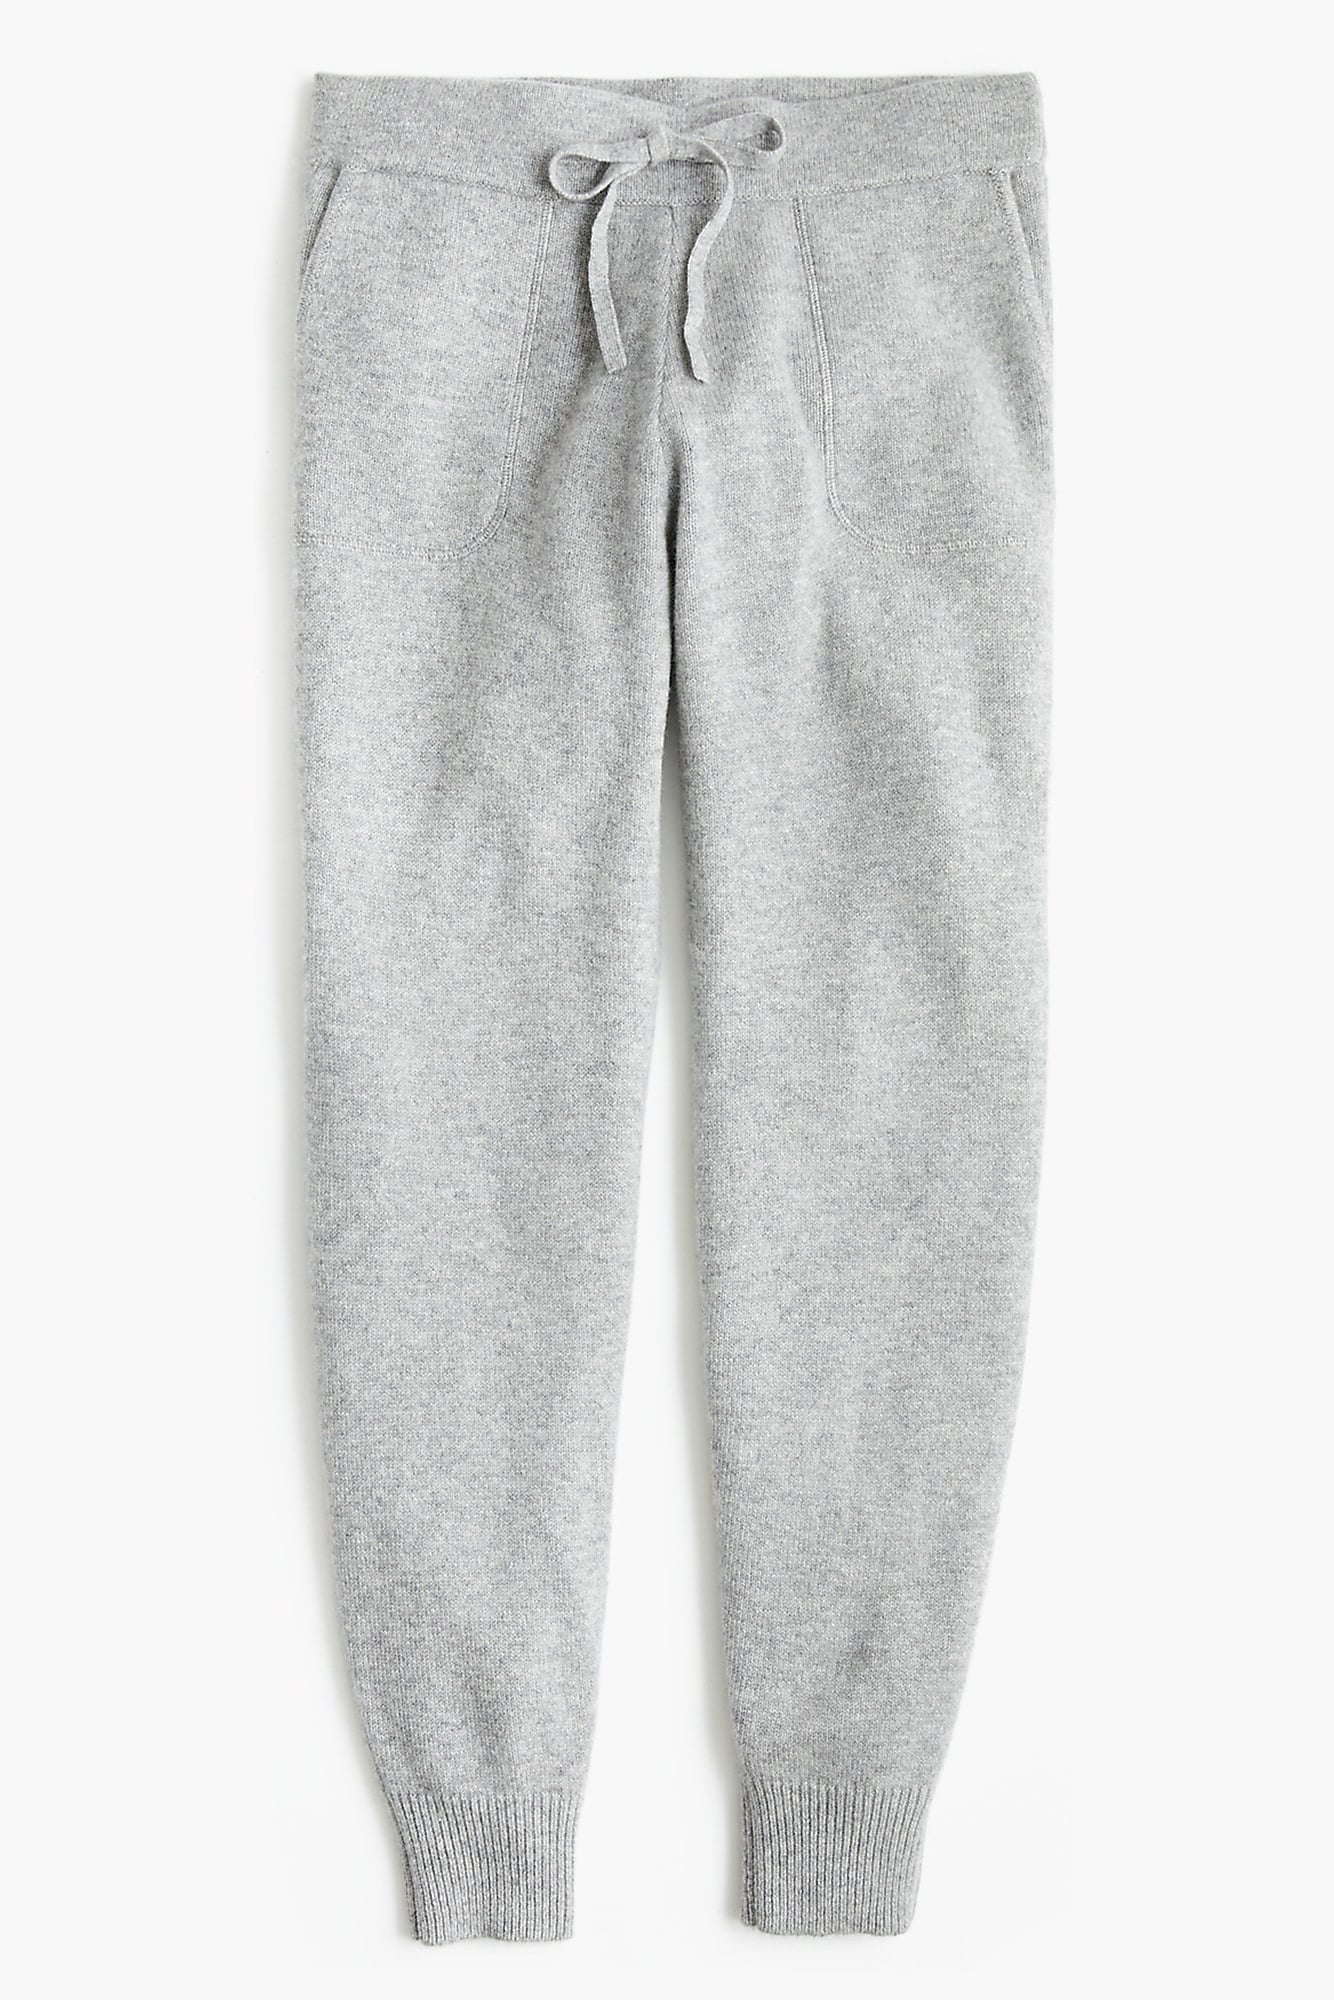 The Cashmere Sweatpants That Sold Out 5 Times in a Row Just Got